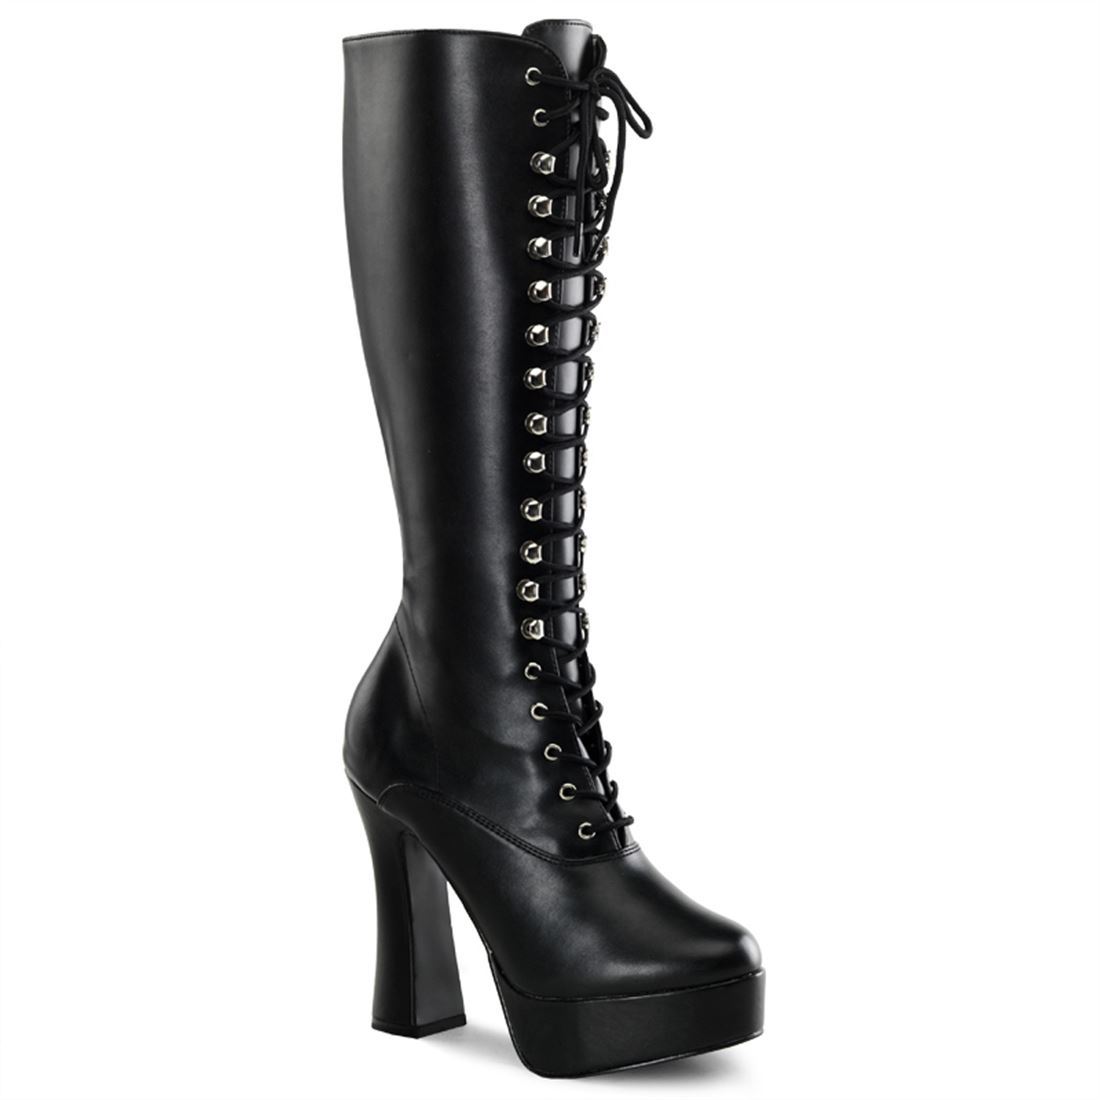 5" Electra Lace Up Knee Boot in matte black, right side view.